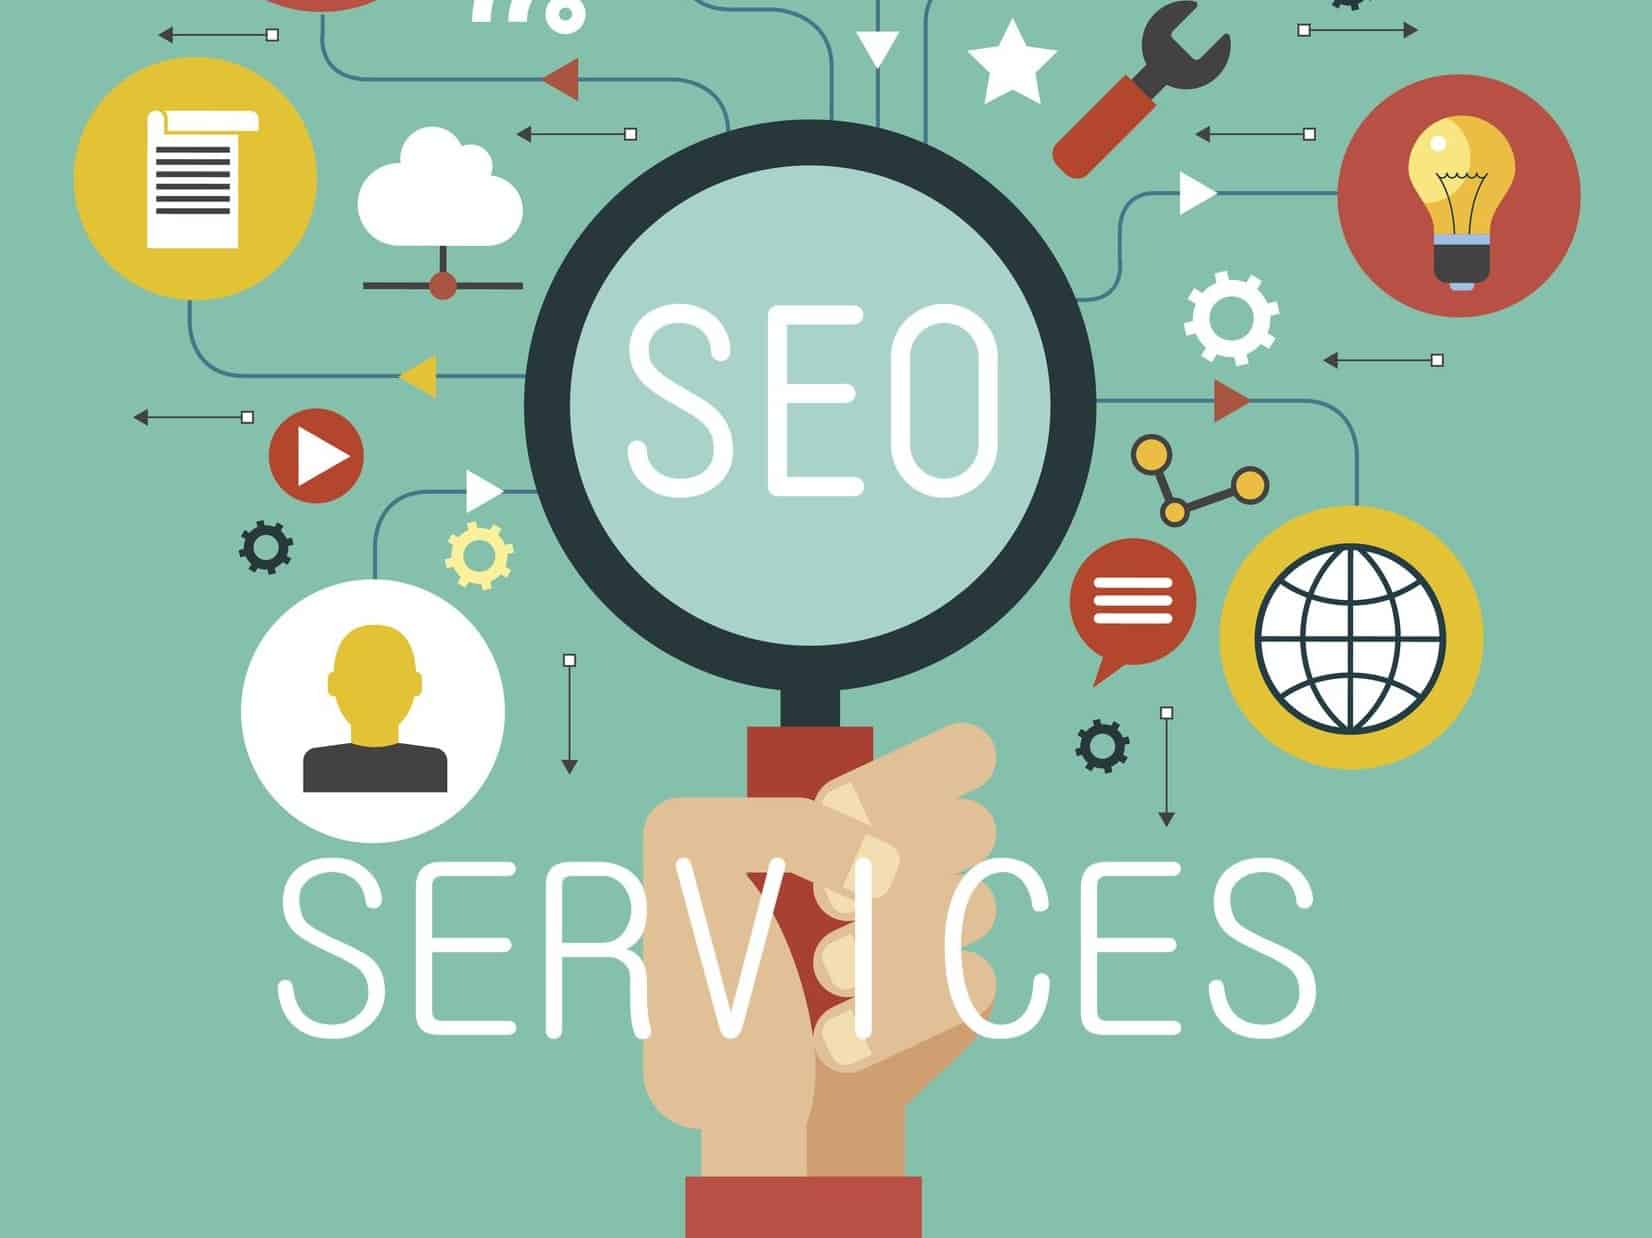 What You Need to Know Before You Pay for SEO Services